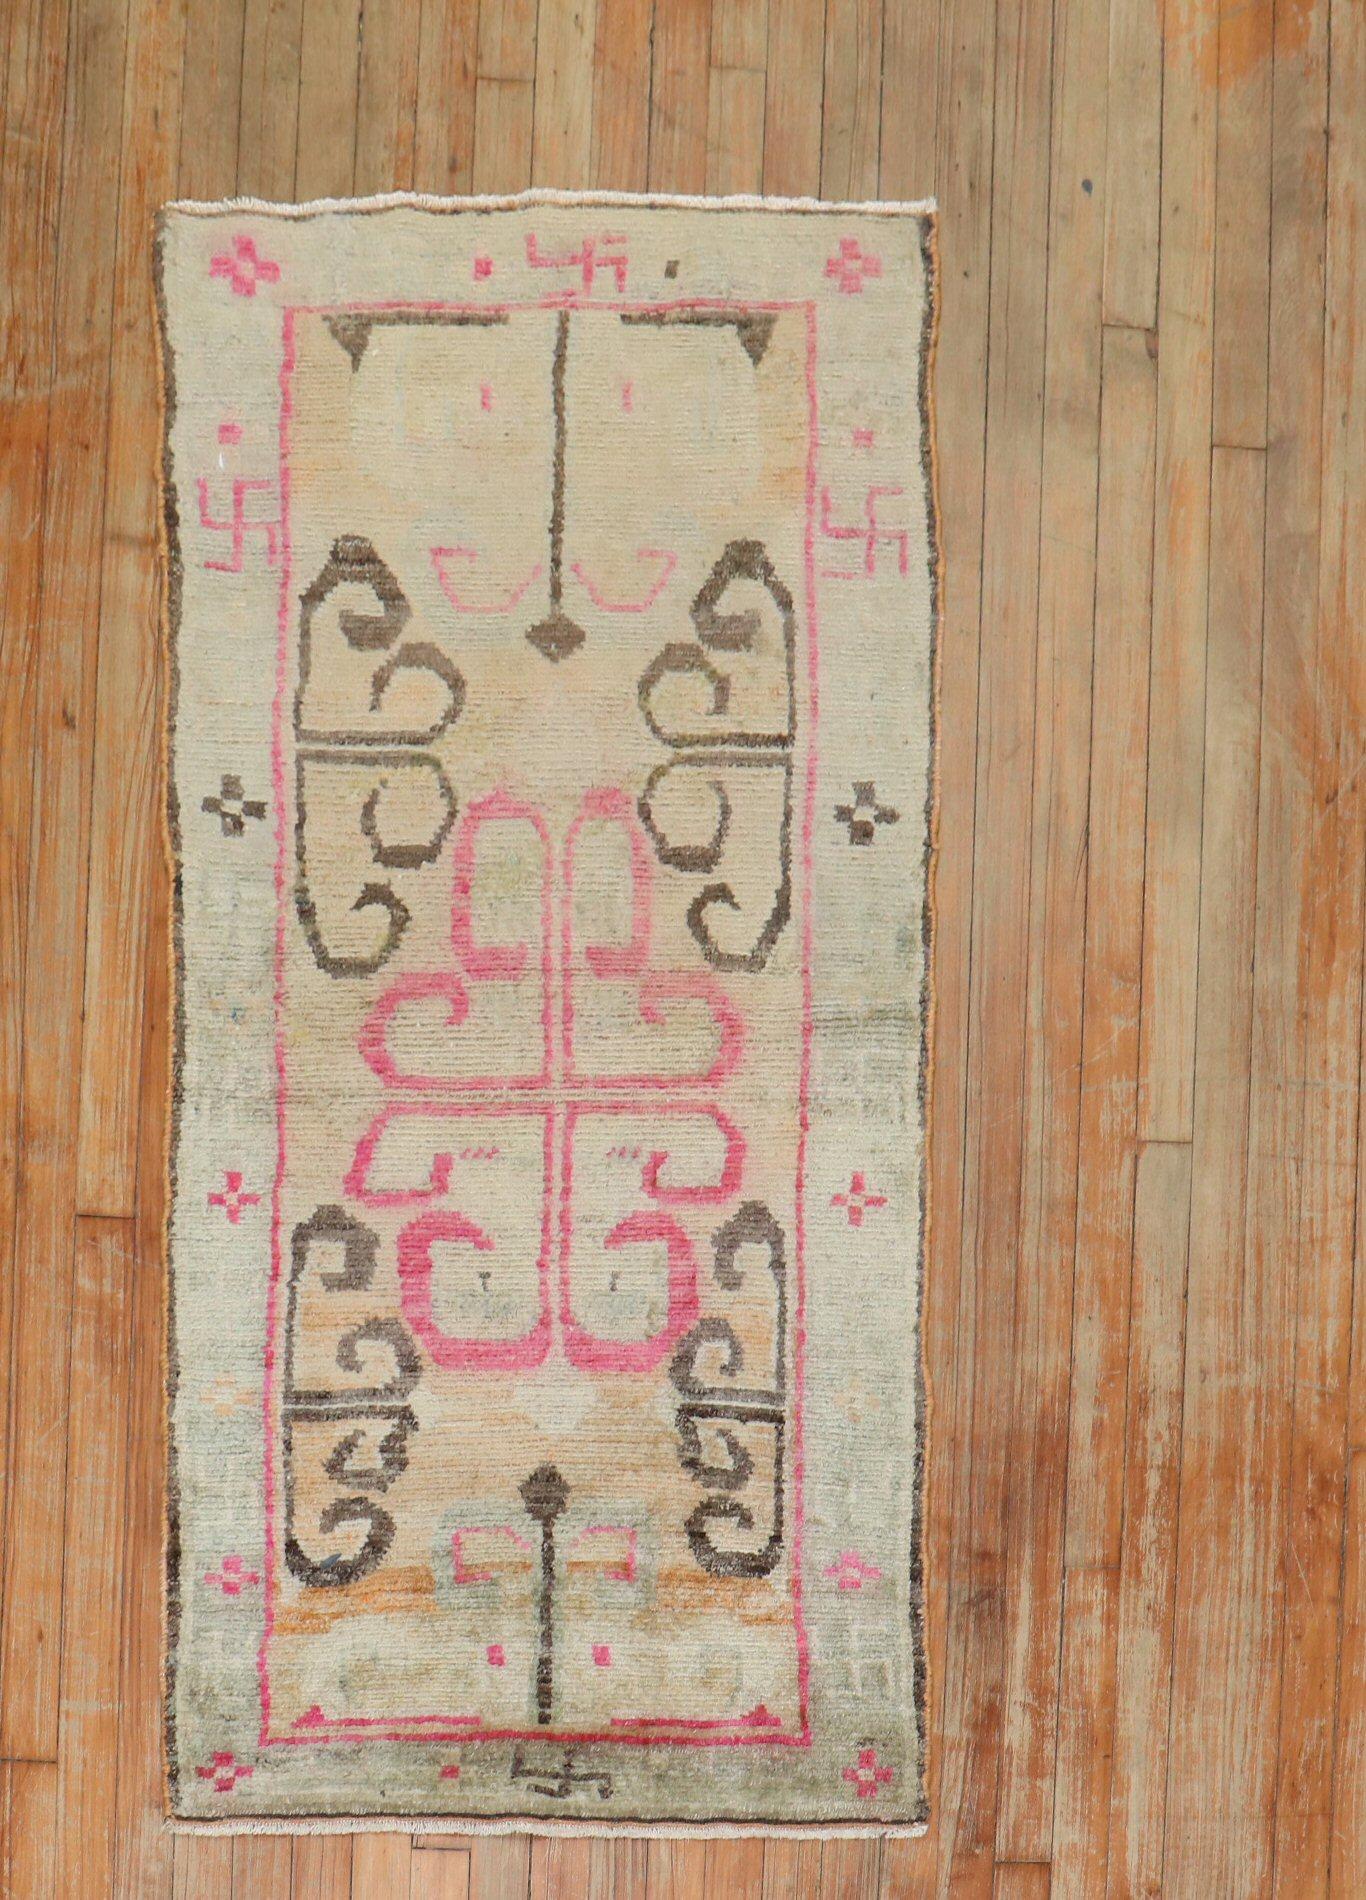 2nd Quarter of the 20th century Tibetan Rug in feminine colors. The border consists soft brown, pink and white swastikas (? or ?) t religious and cultural 